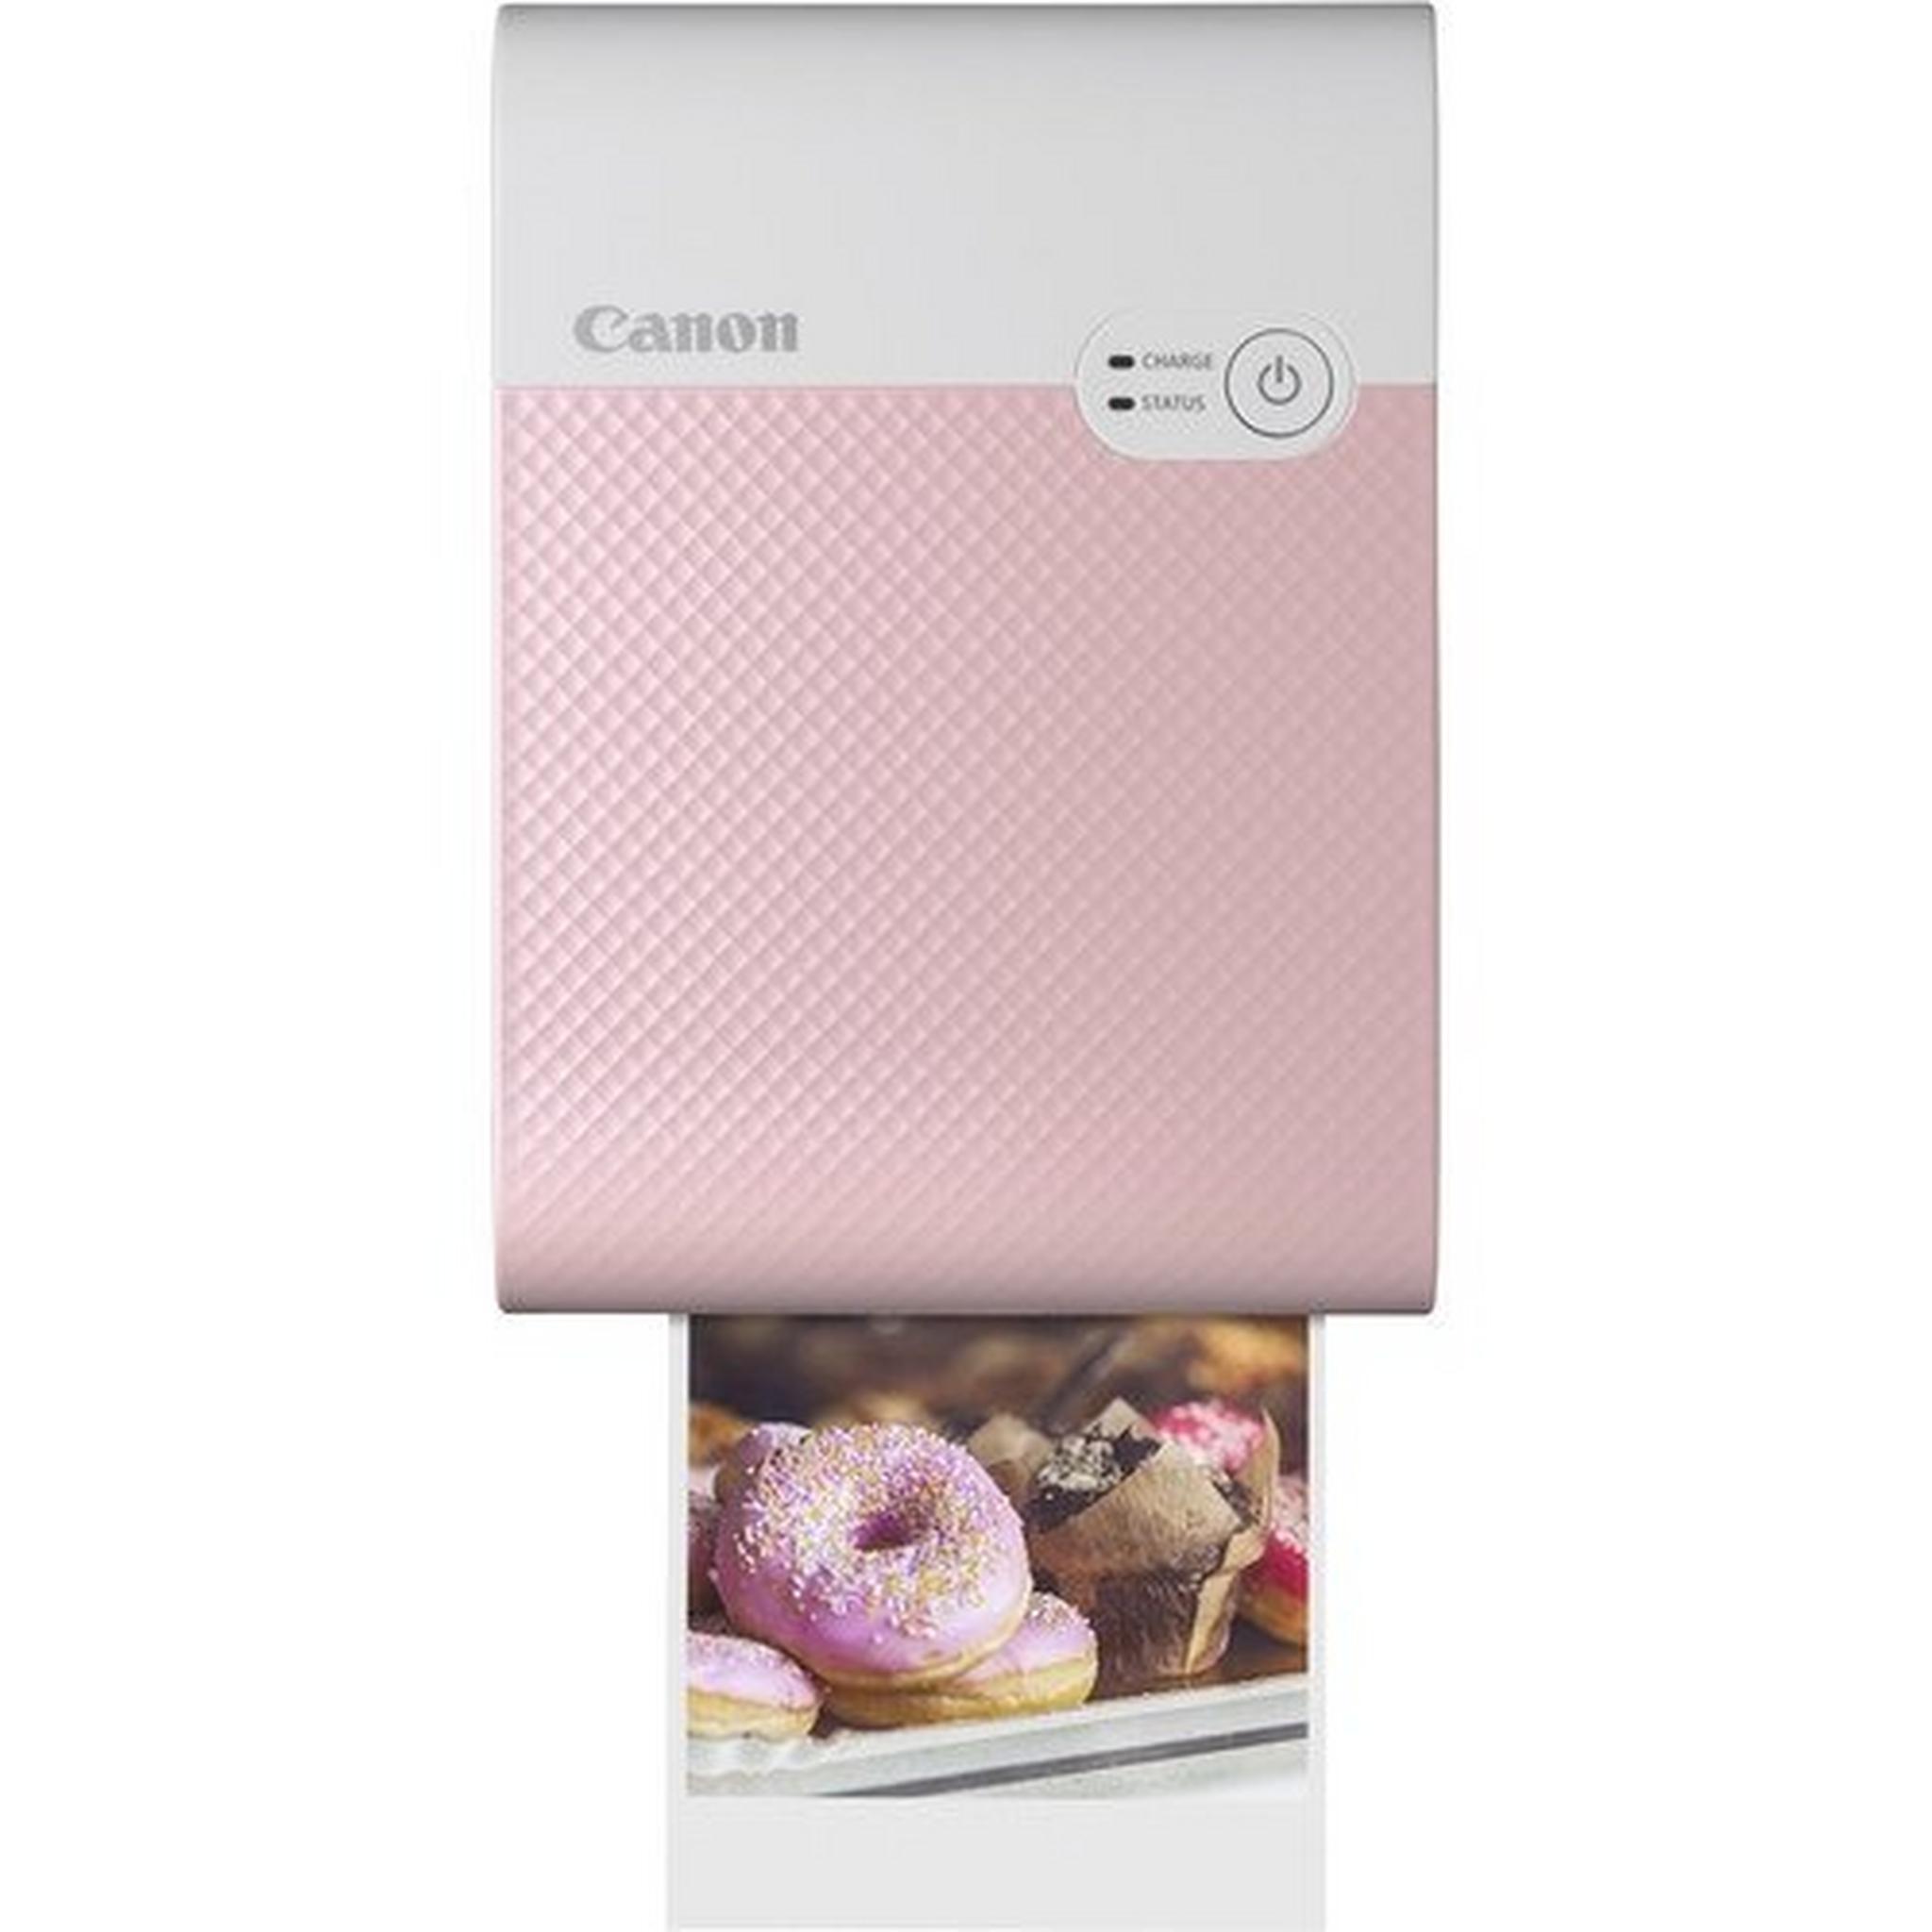 Canon Selphy Square QX10 Compact Photo Printer - Pink